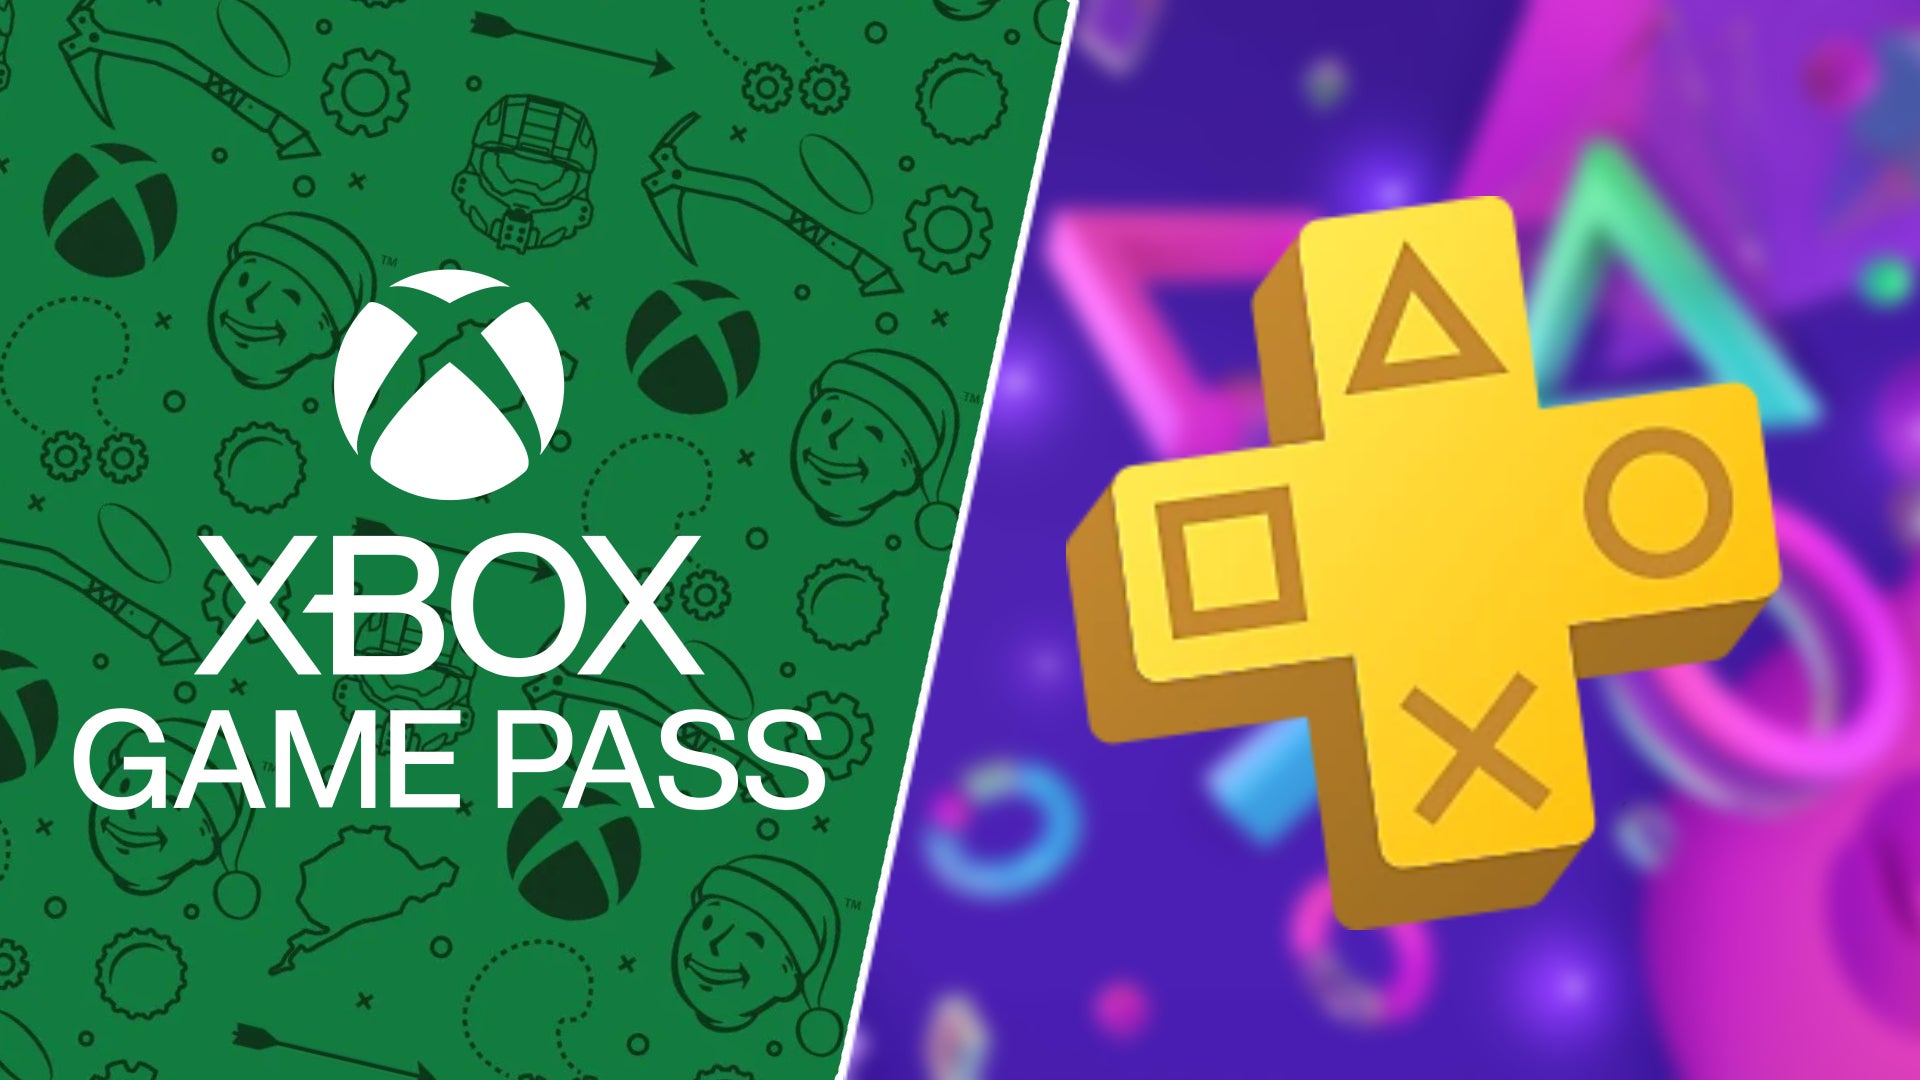 As a child, Game Pass and PS Plus would have seemed like a Christmas miracle